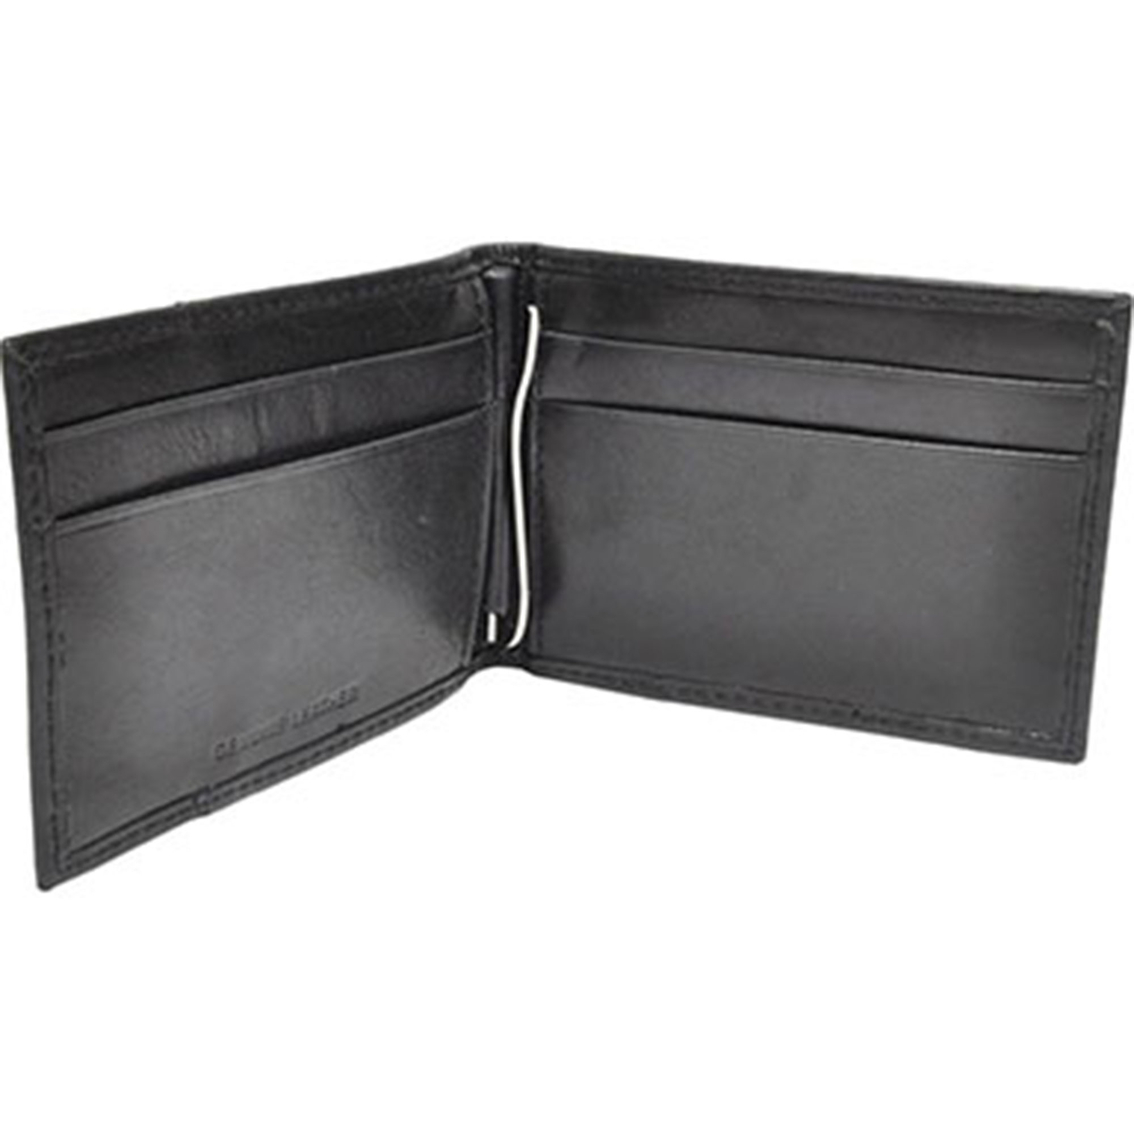 Dockers Wallet With Front Pocket | Wallets | Clothing & Accessories ...